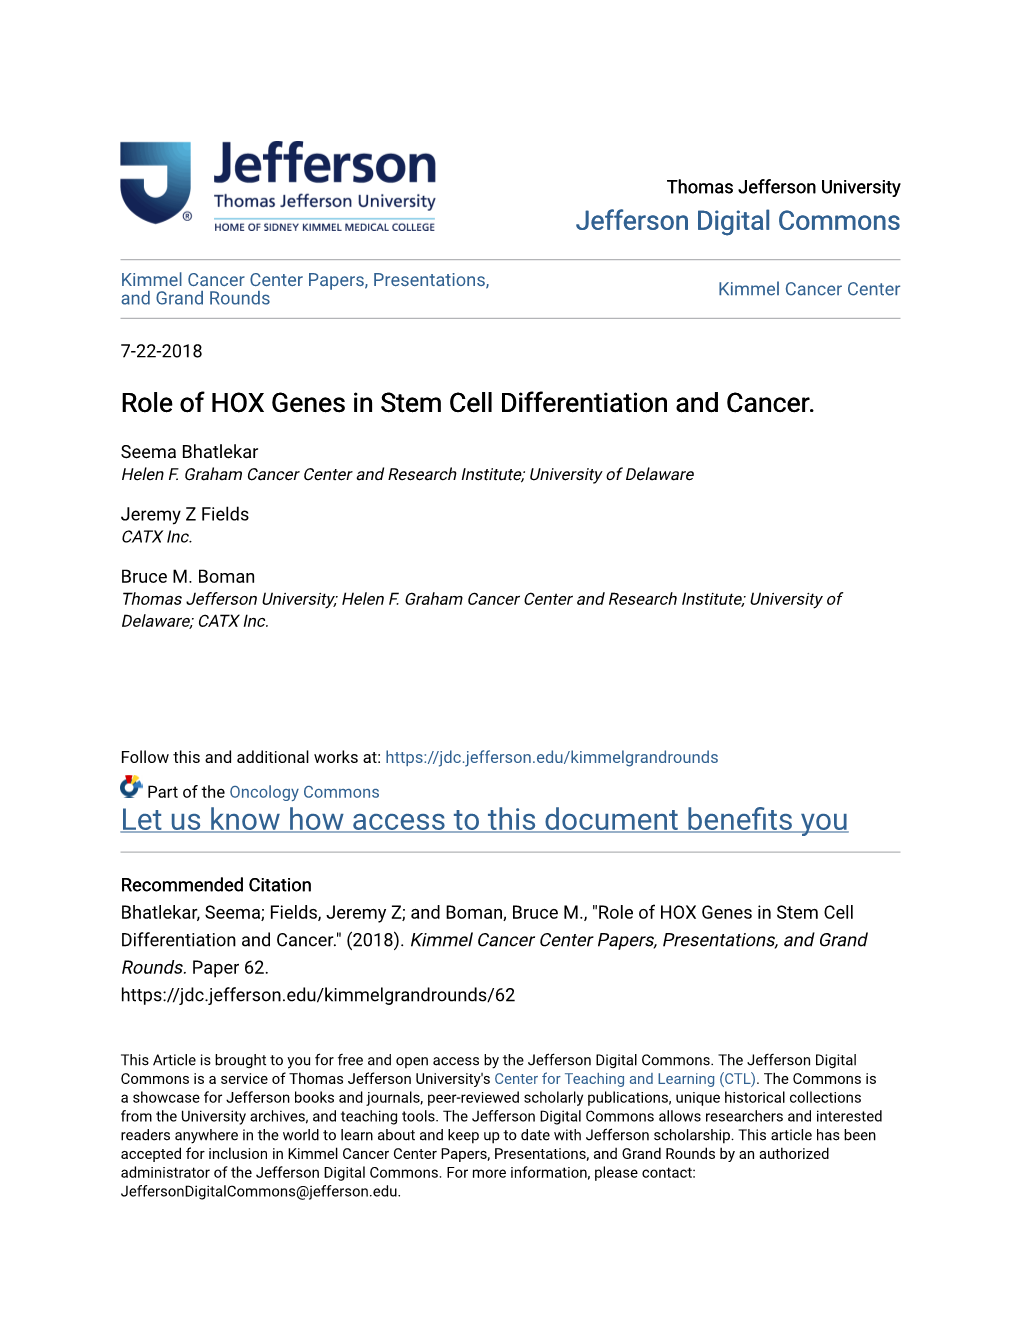 Role of HOX Genes in Stem Cell Differentiation and Cancer